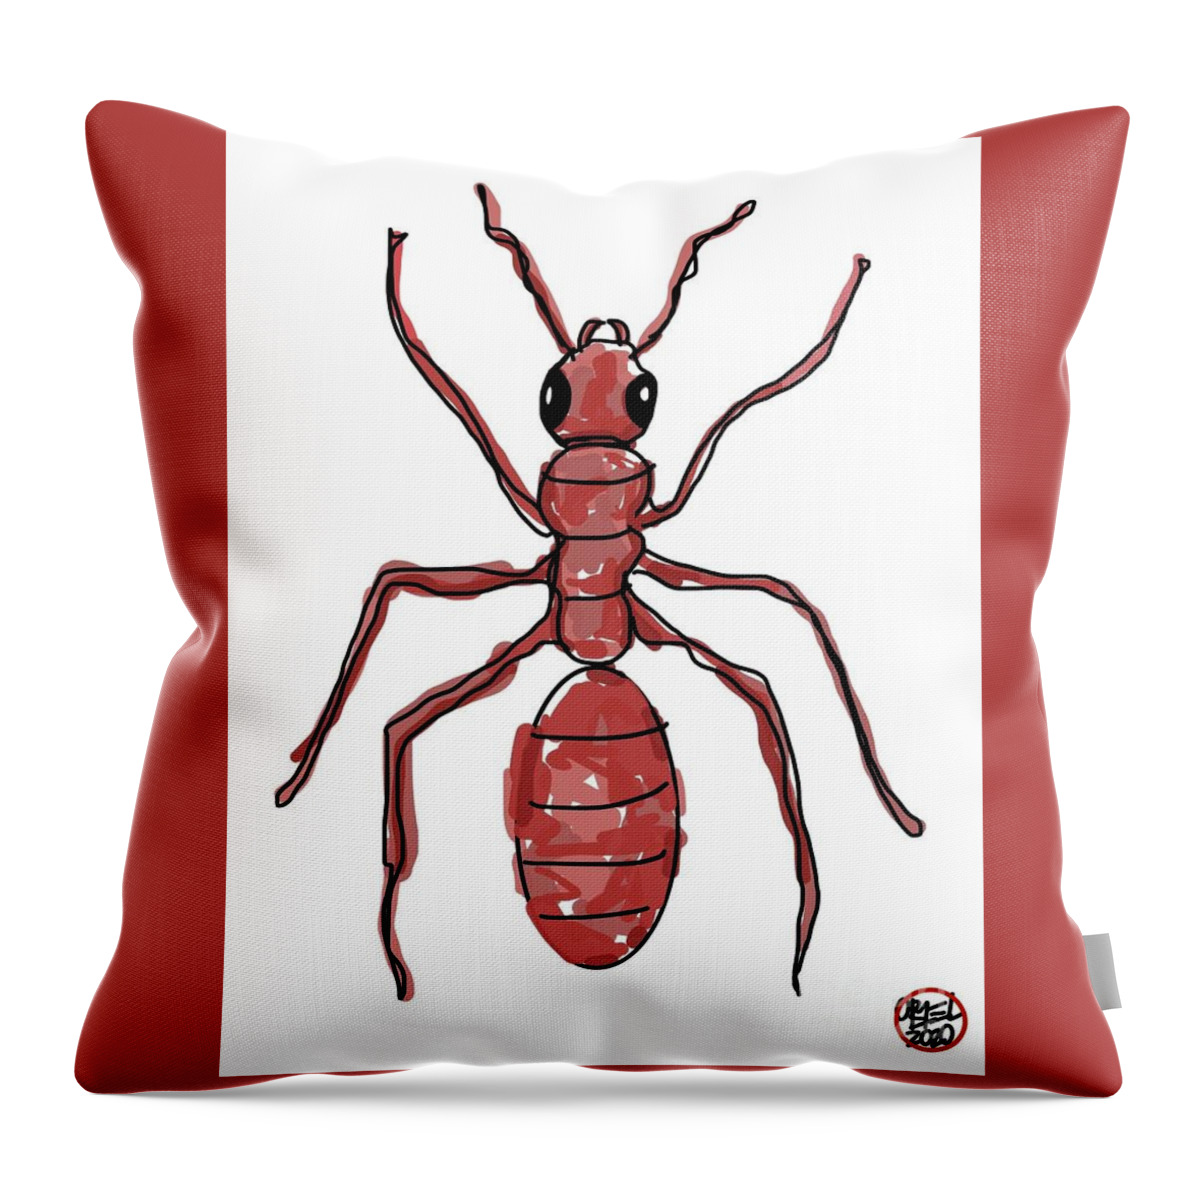  Throw Pillow featuring the painting Army Ant by Oriel Ceballos